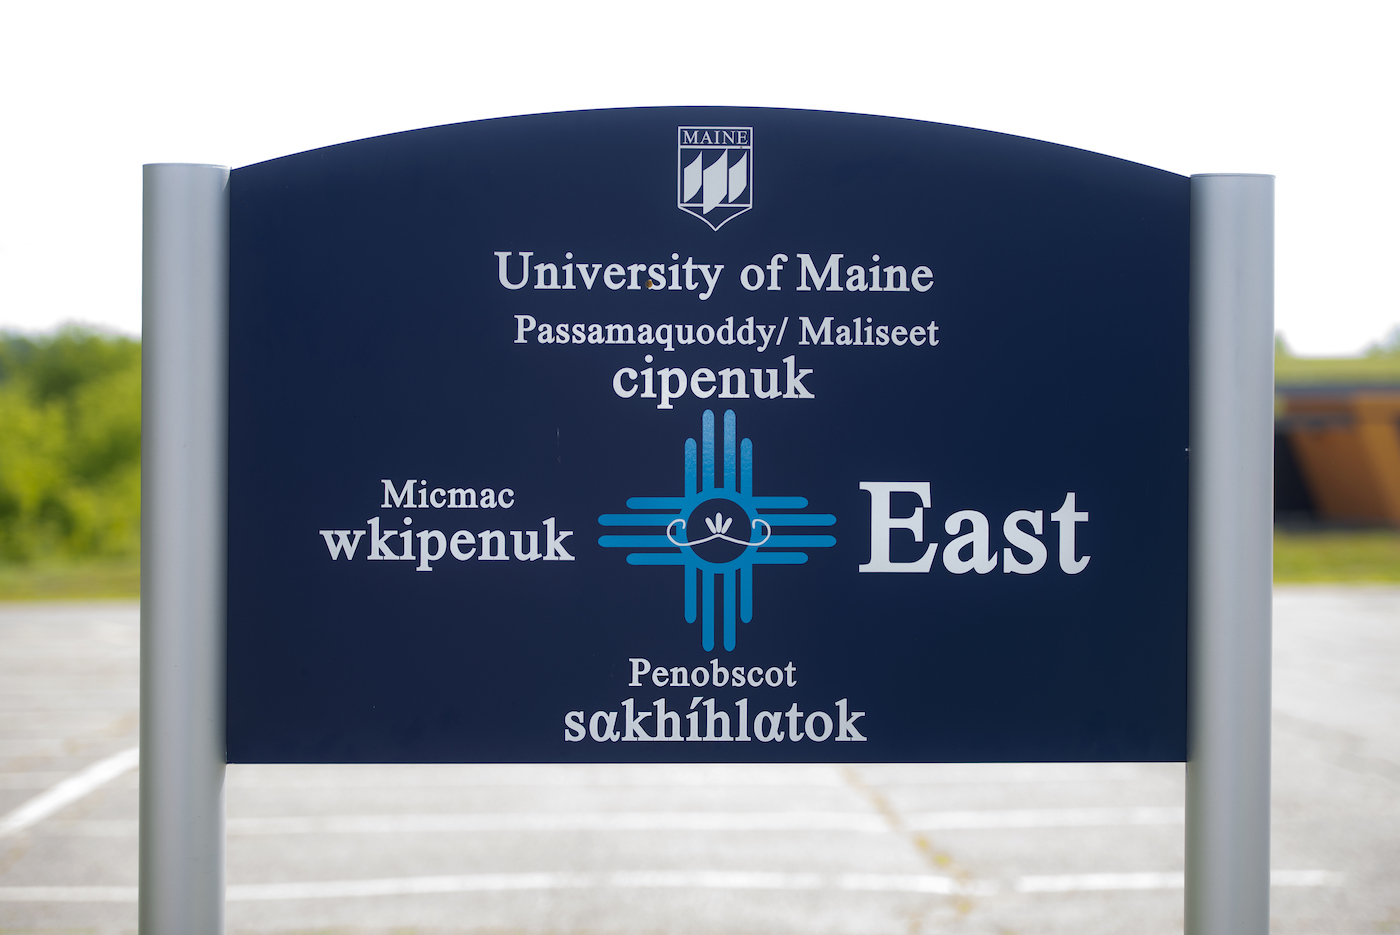 A photo of the sign at the East entrance of University of Maine campus